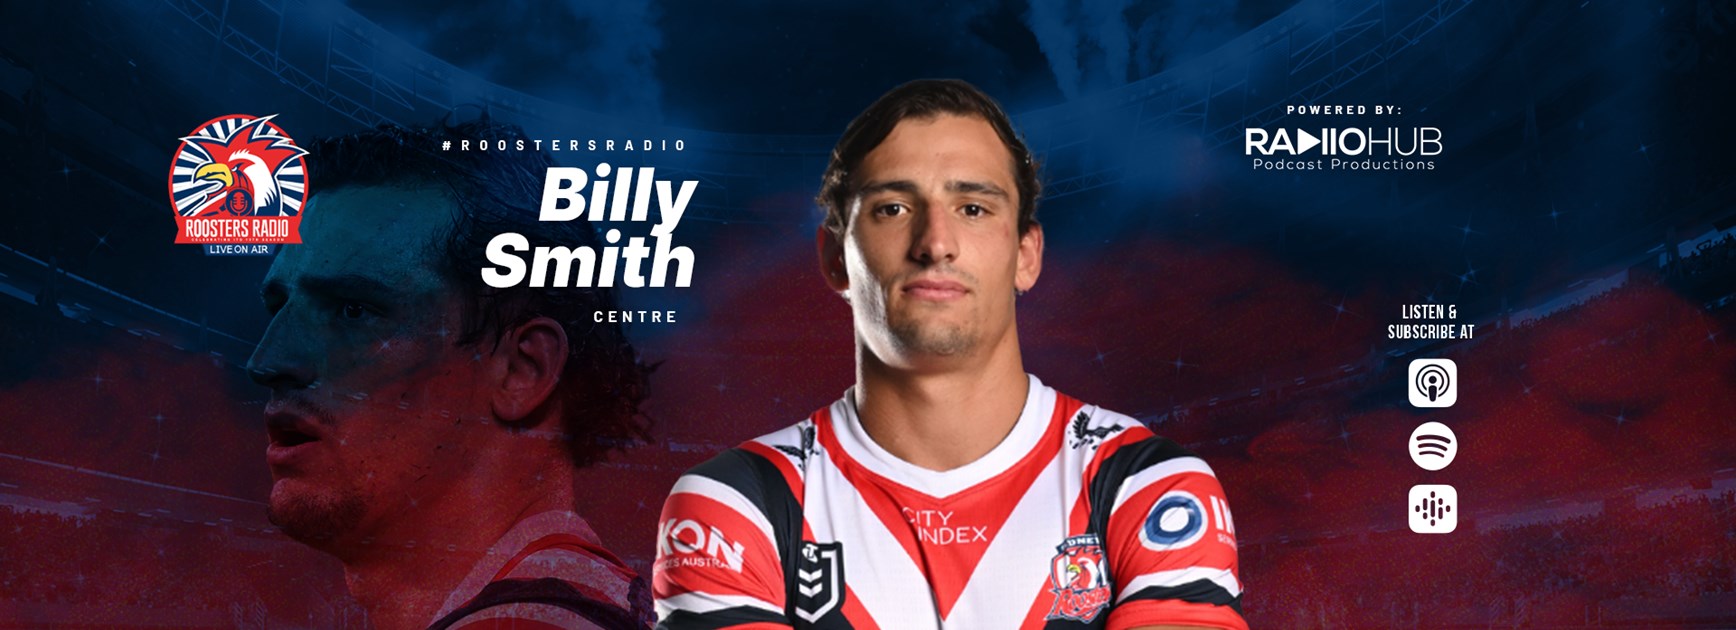 Roosters Radio Ep 155: Billy Smith